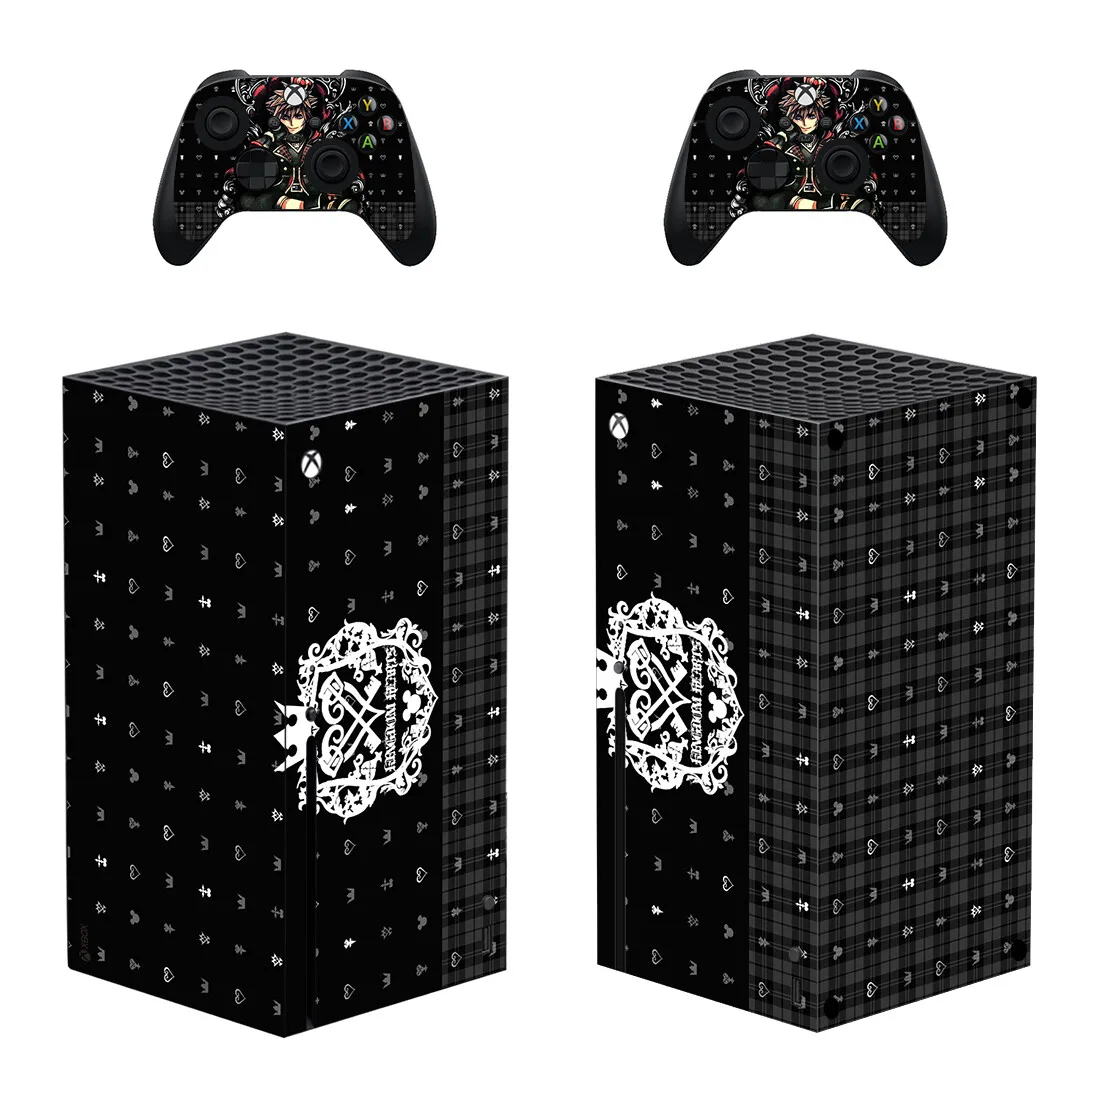 

Kingdom Hearts Skin Sticker Decal Cover for Xbox Series X Console and 2 Controllers Xbox Series X Skin Sticker Vinyl